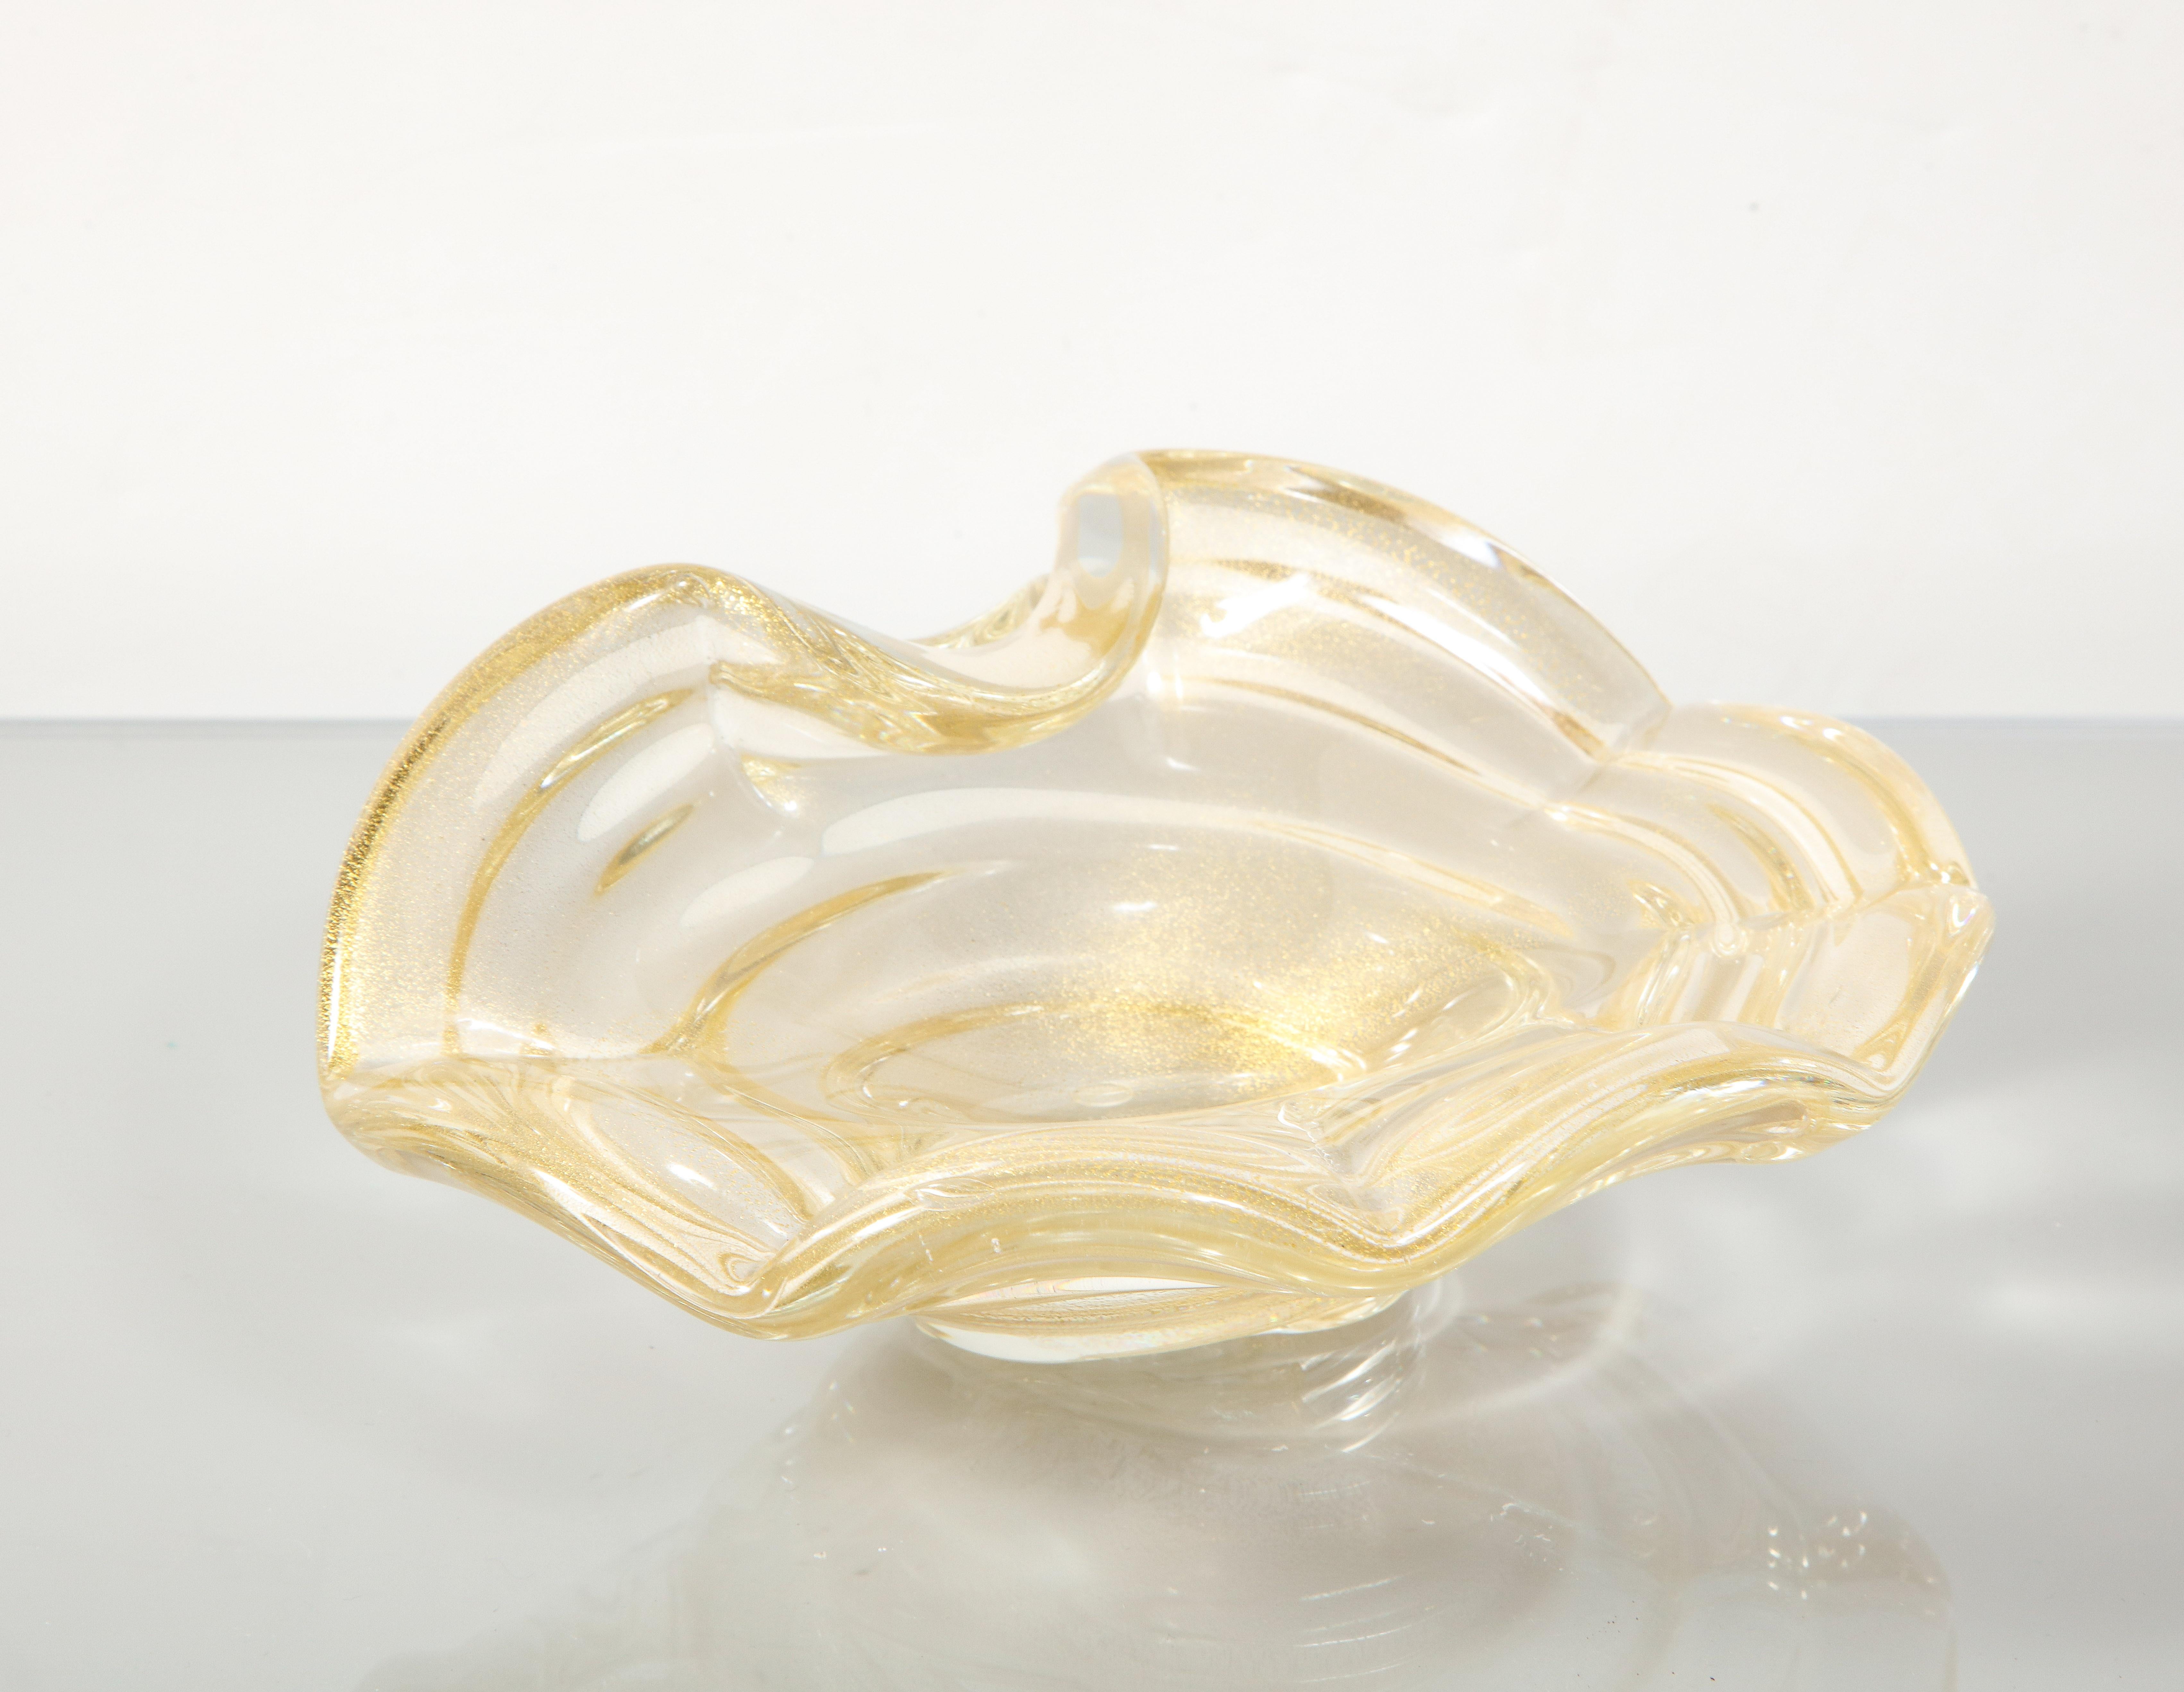 Vintage Murano glass bowl #3 with gold dust by Alberto Donà. Uniquely shaped bowl with 24-karat gold dust infusion and swirling pattern.